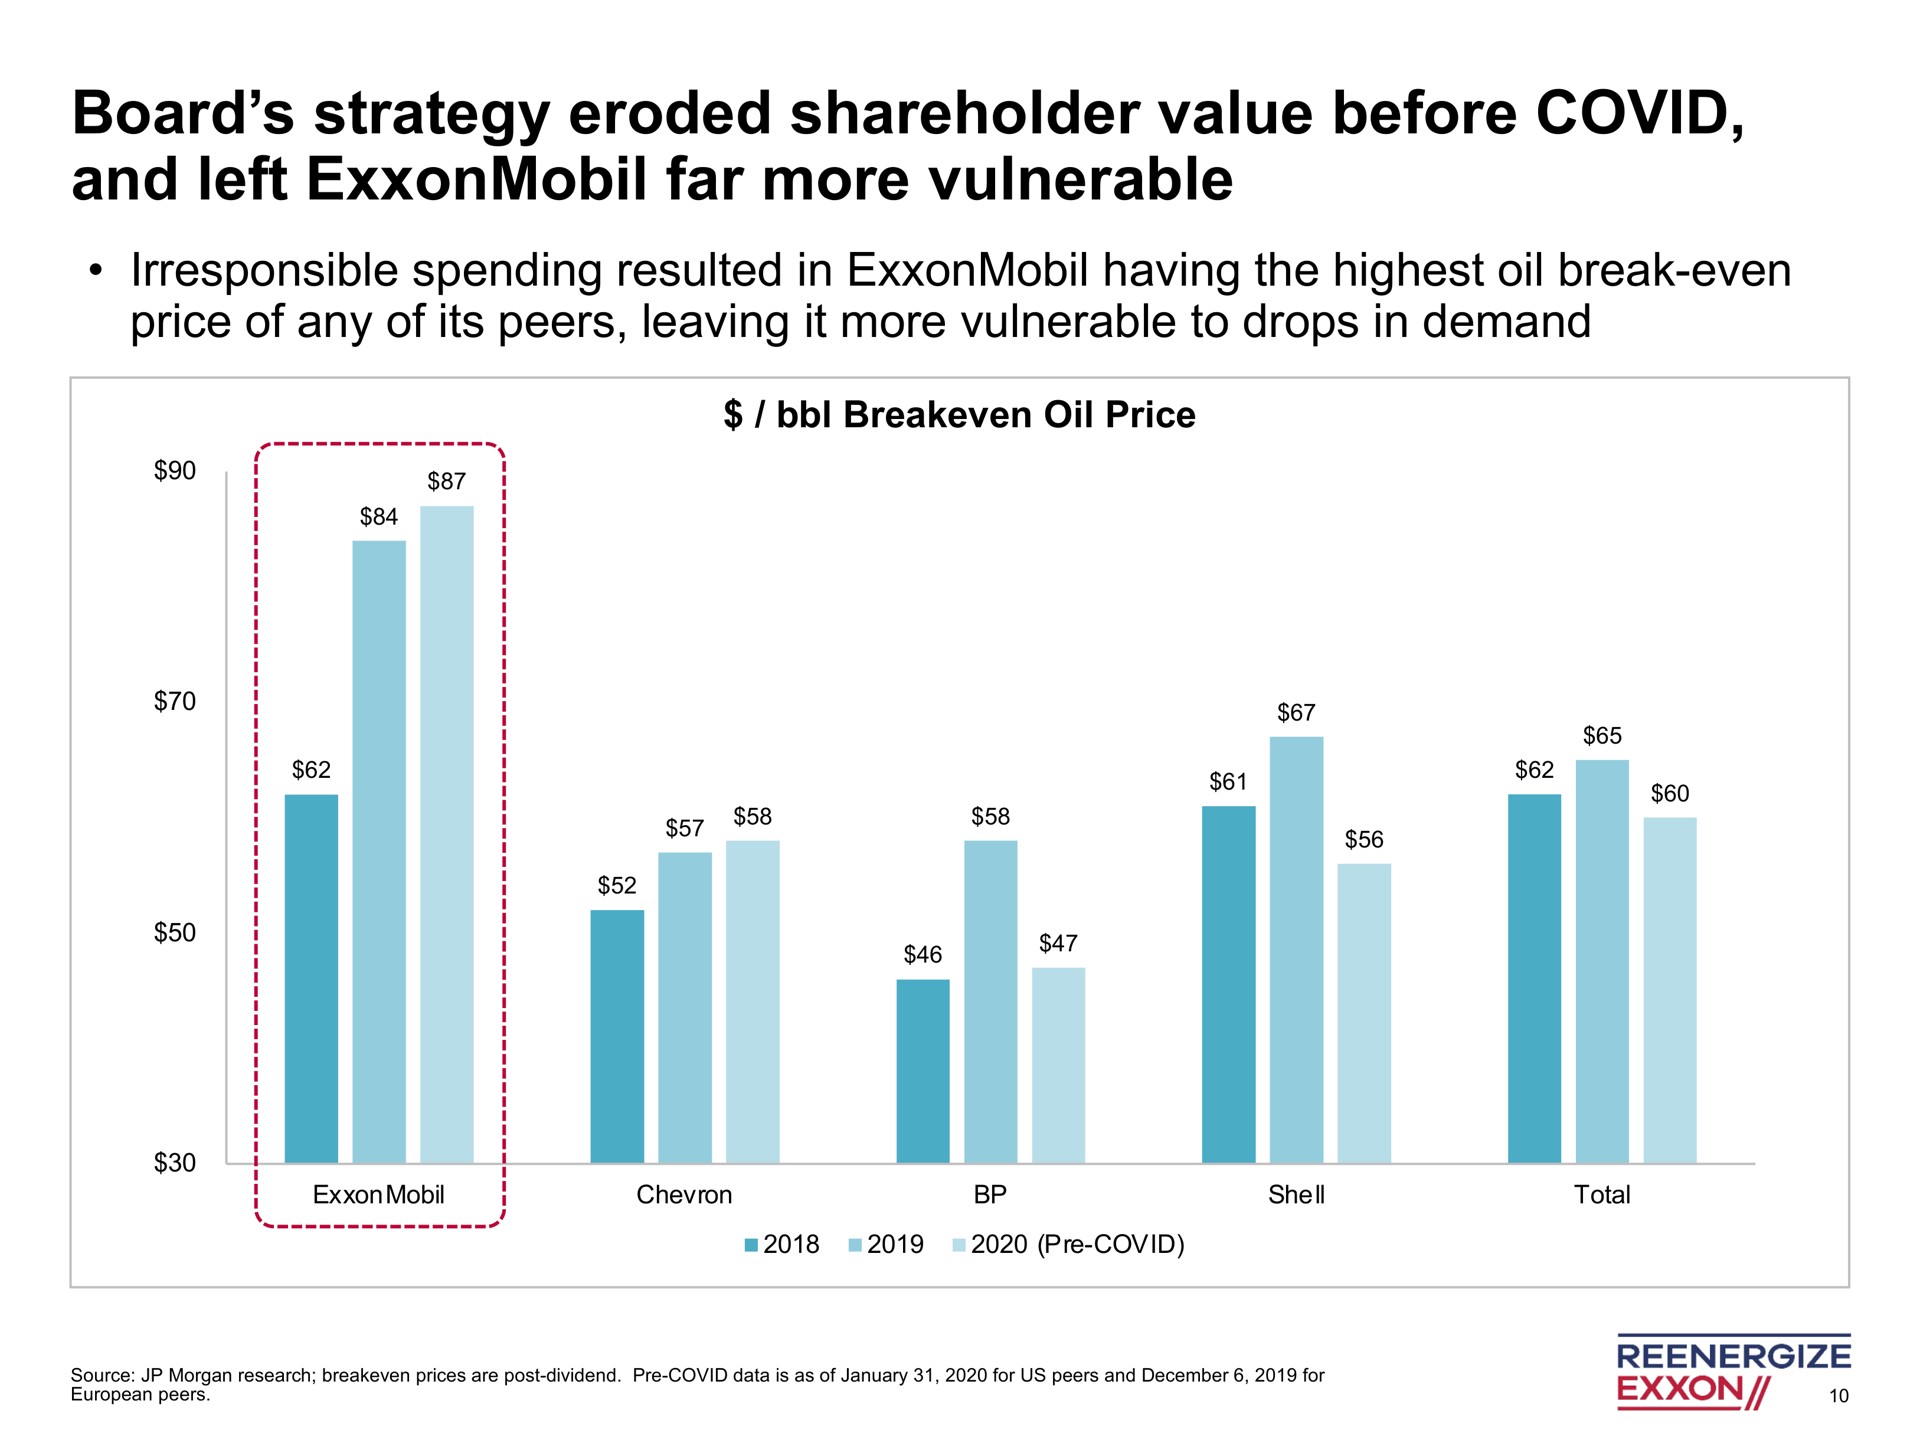 board strategy eroded shareholder value before covid and left far more vulnerable | Engine No. 1